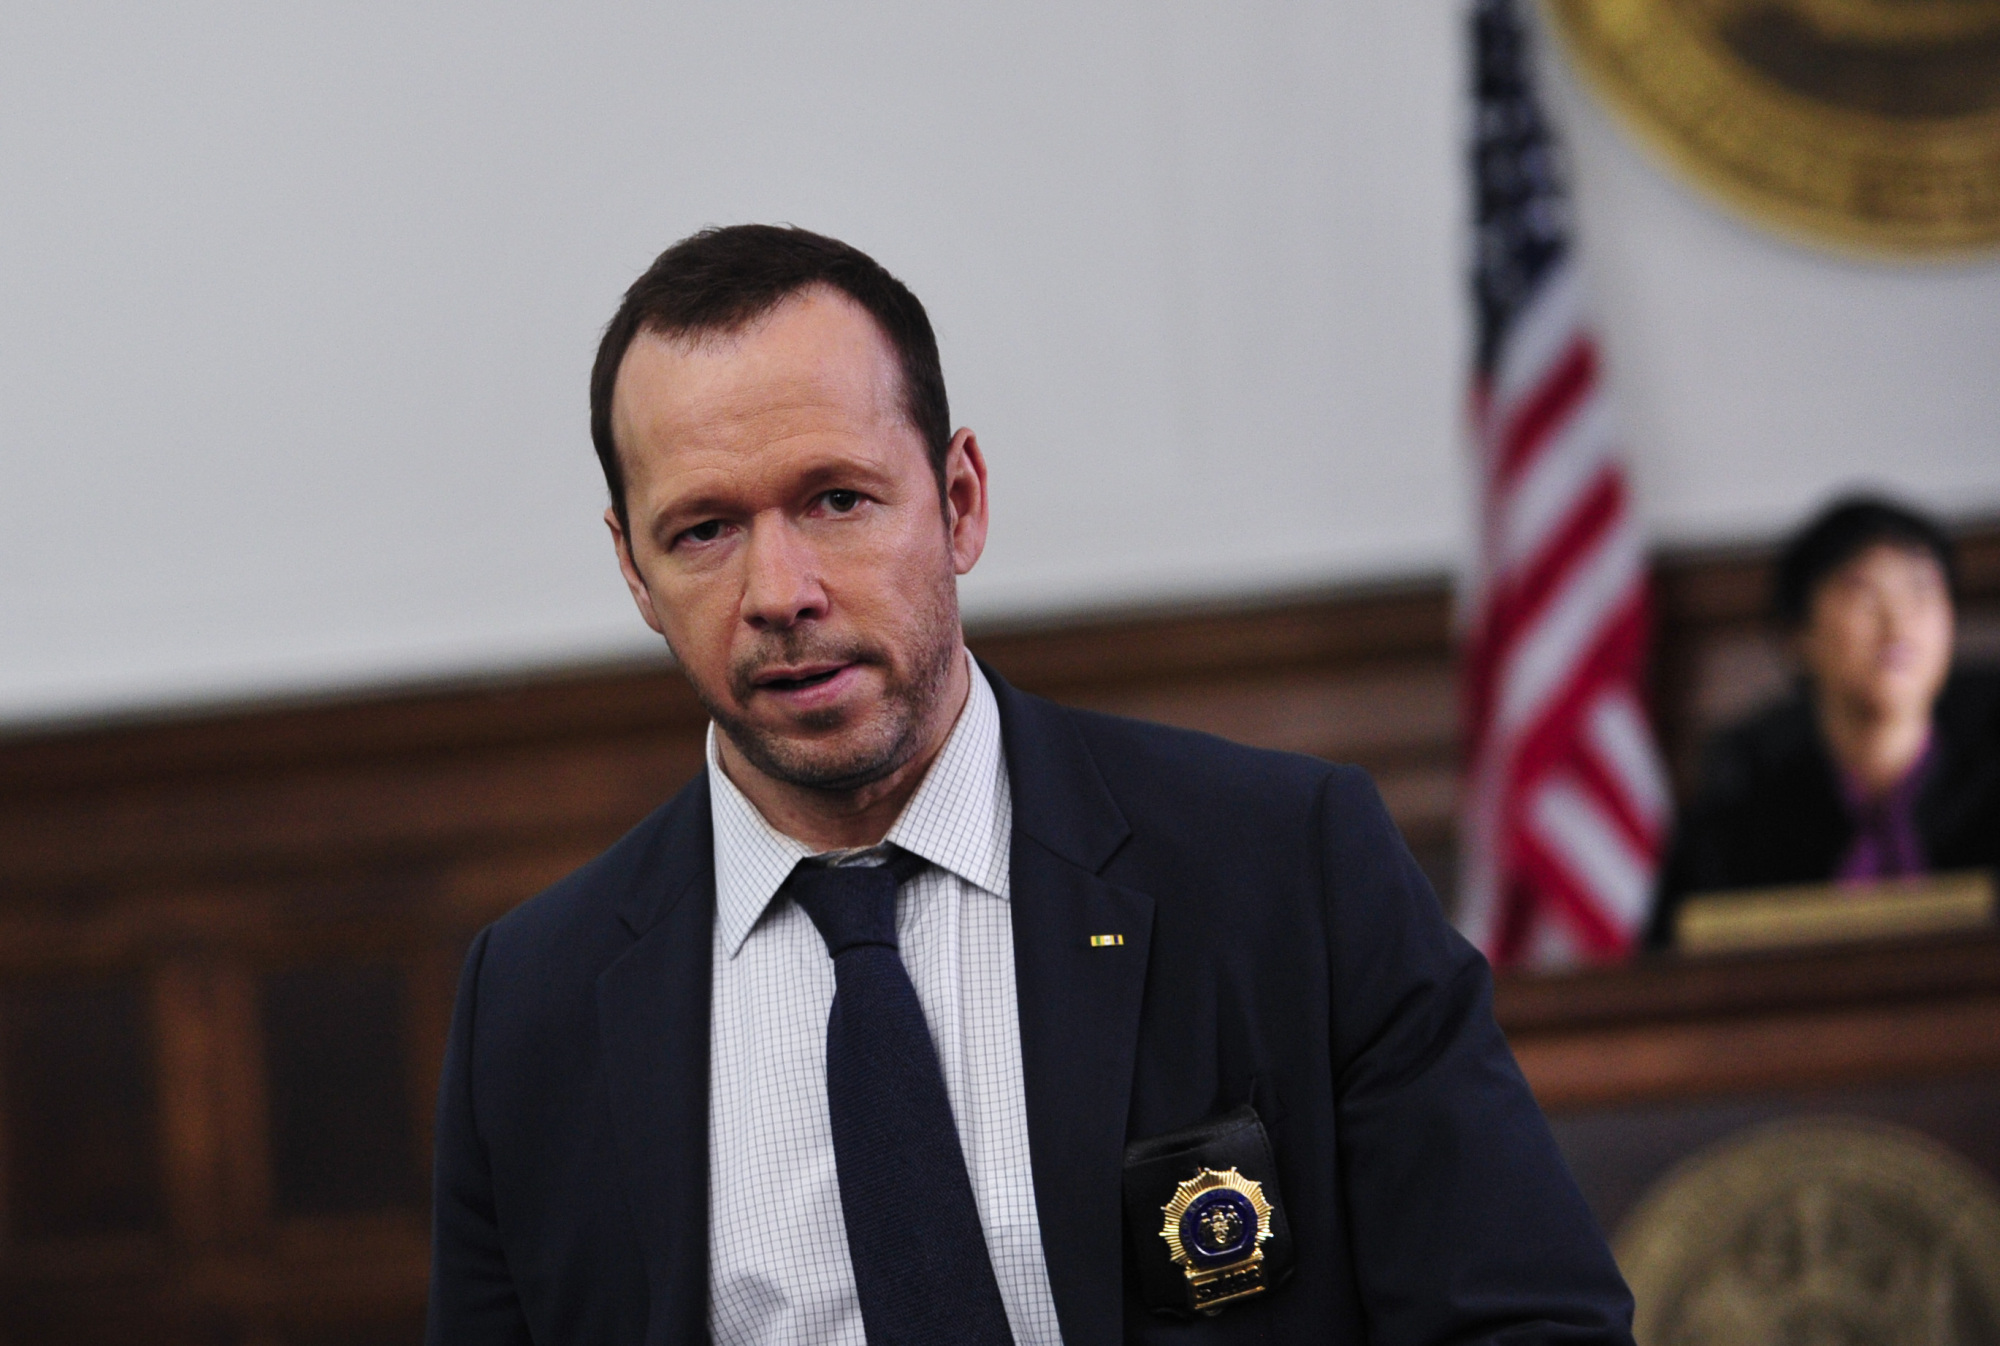 9. Donnie Wahlberg is the eighth of nine children. 